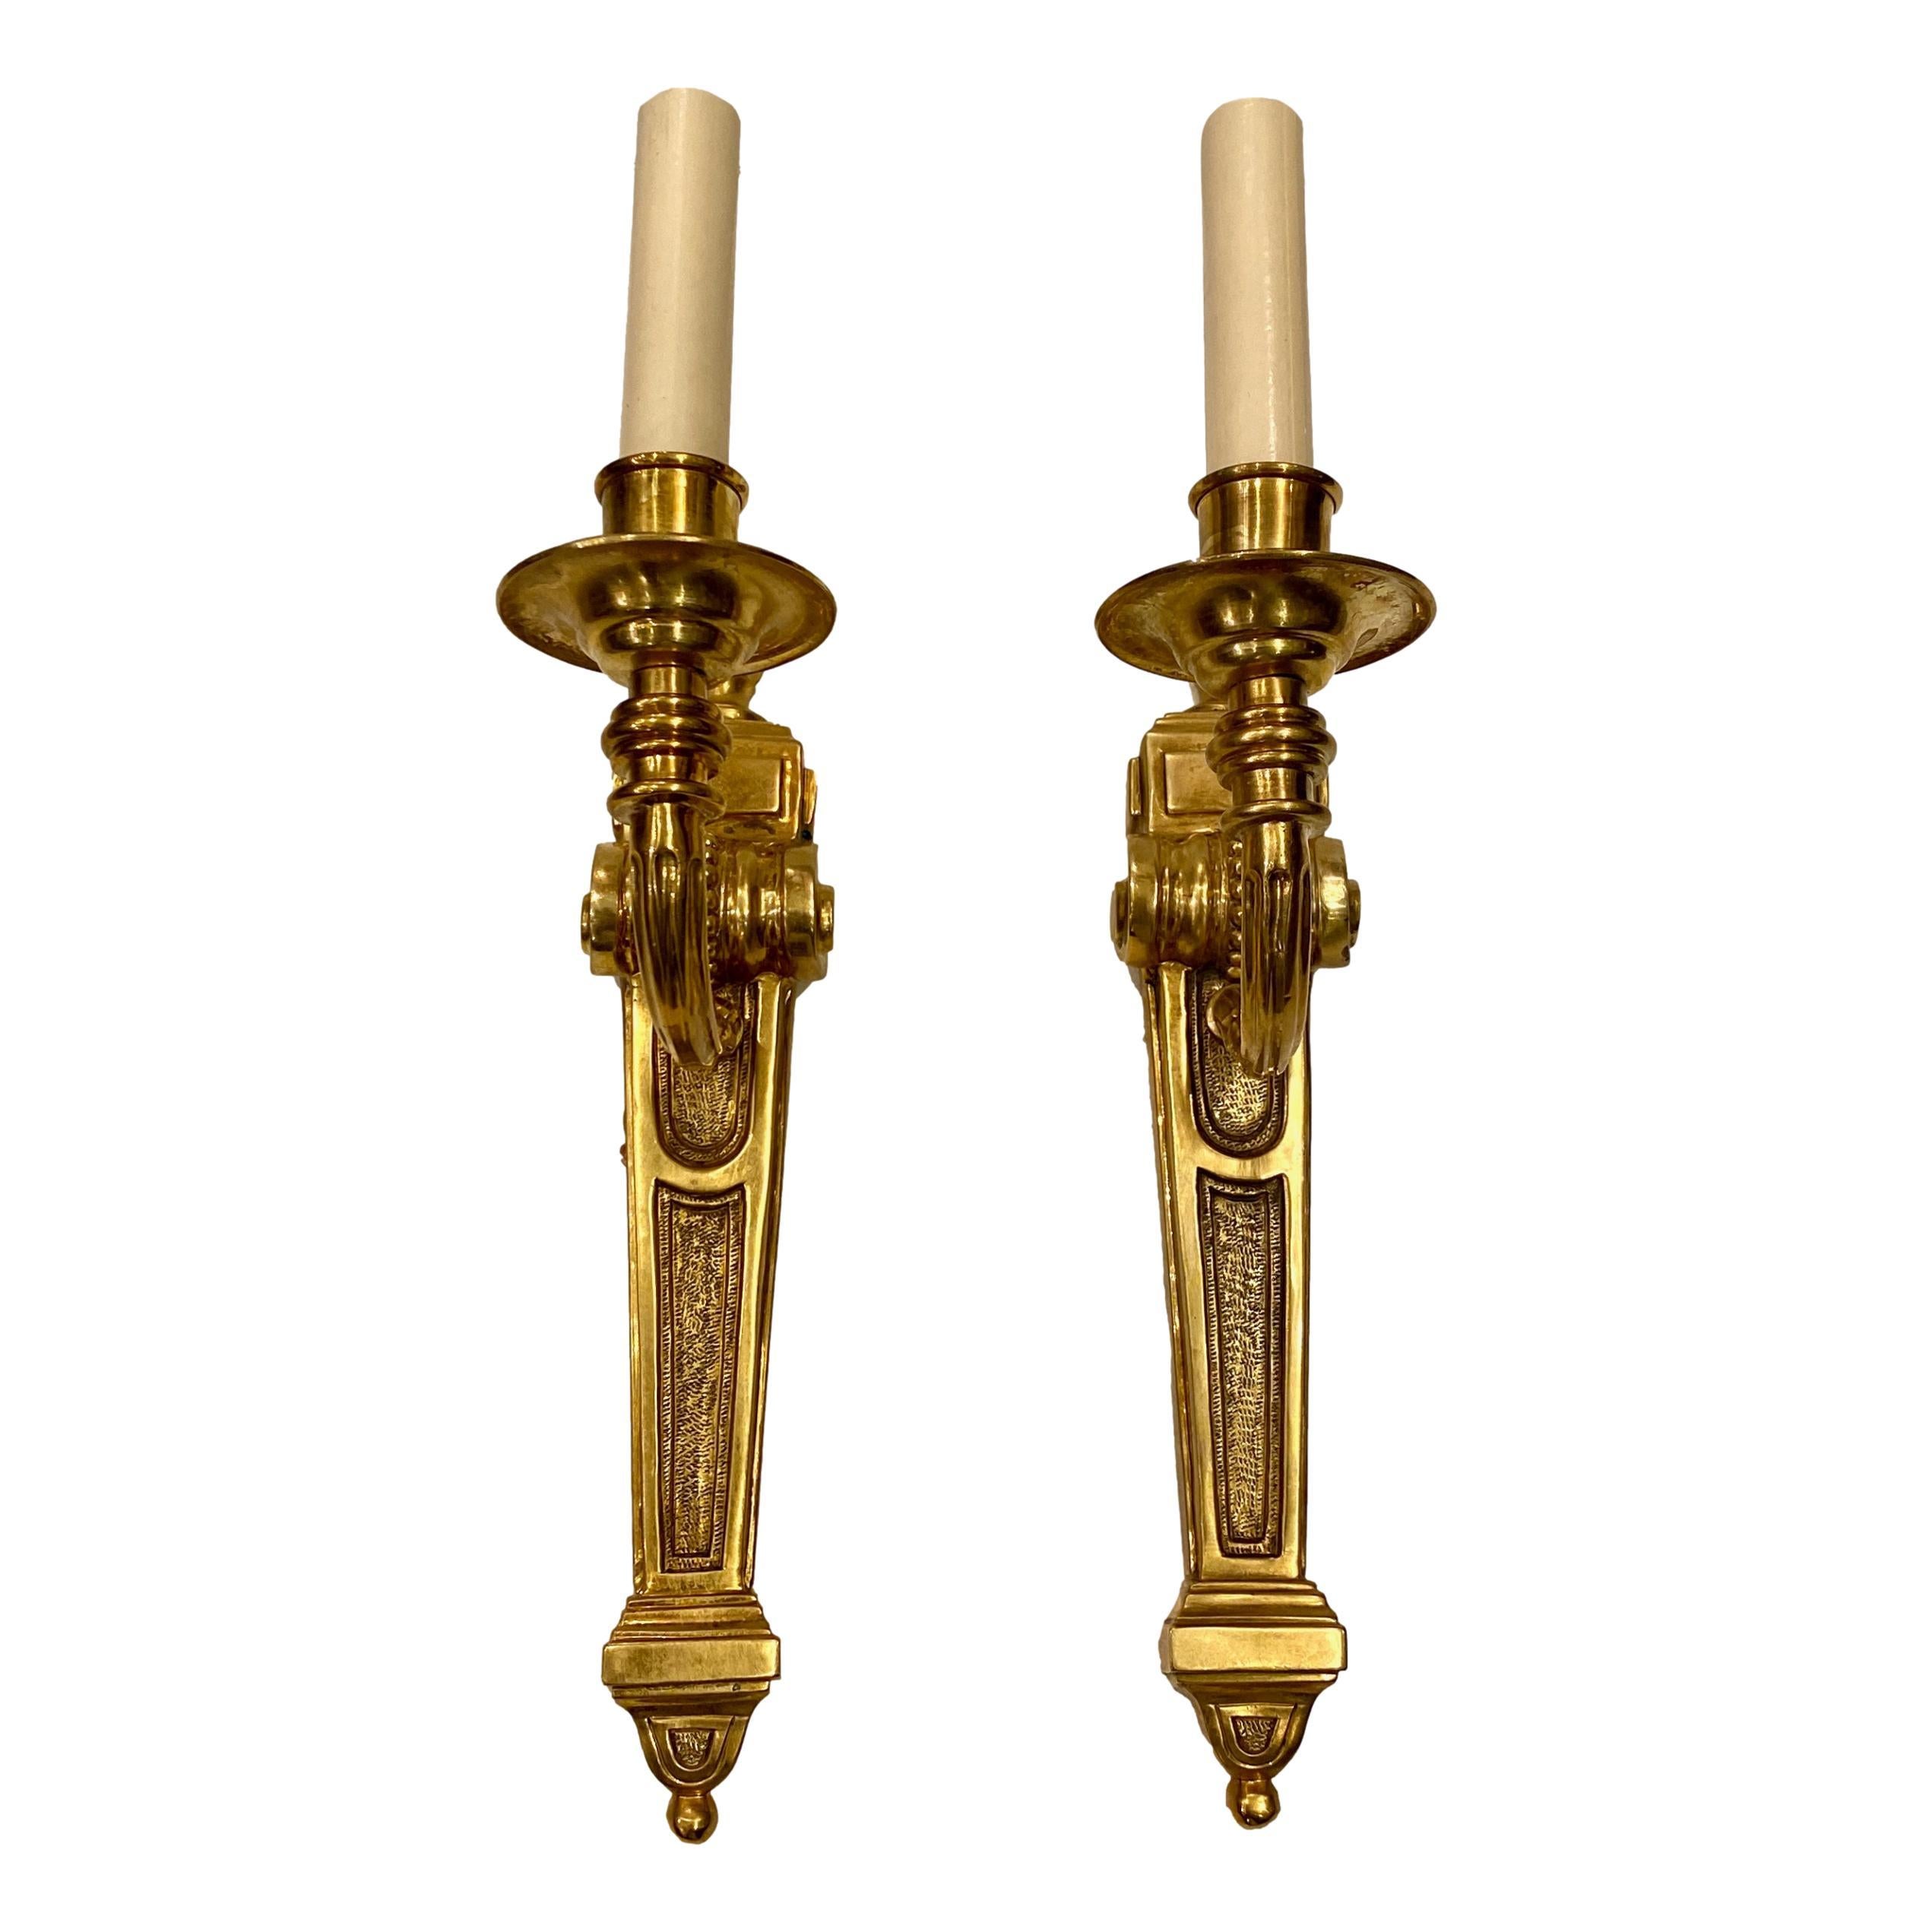 A set of four French circa 1940's neoclassic style single light sconces with original gilt finish. Sold per pair.

Measurements:
Height: 15